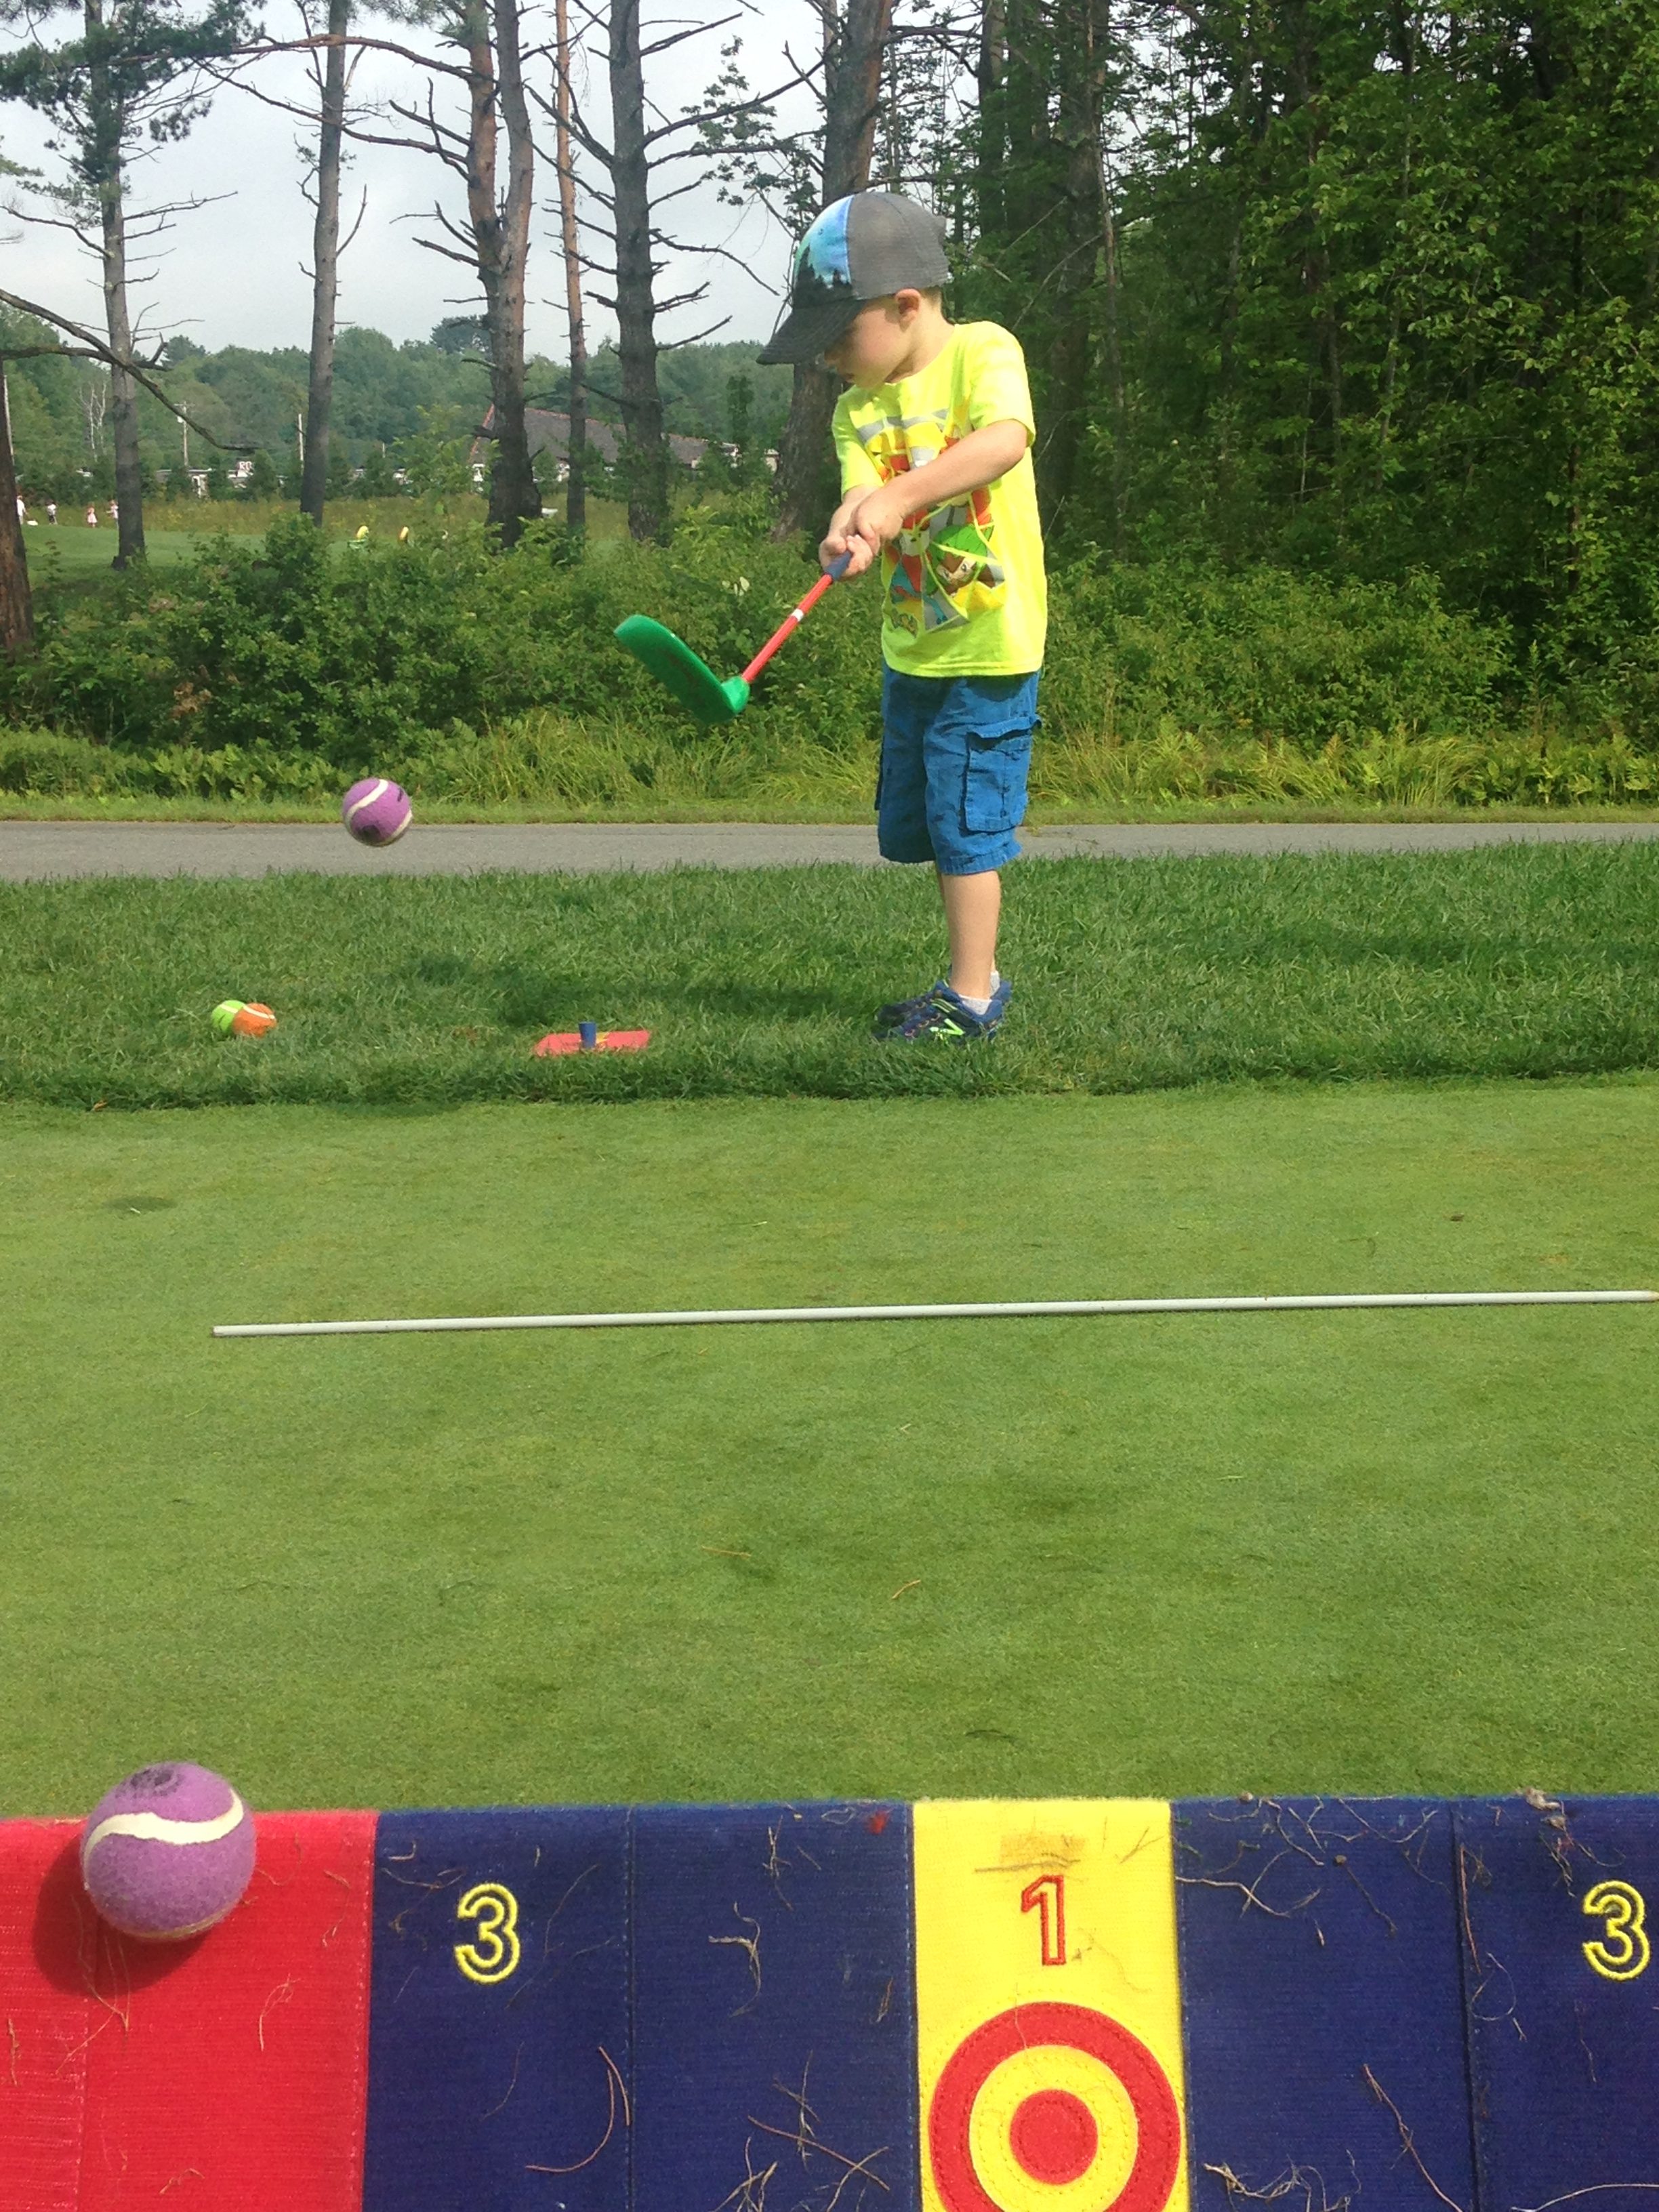 Summer Kids Golf Clinics and Kids Play Free Sunday Afternoons